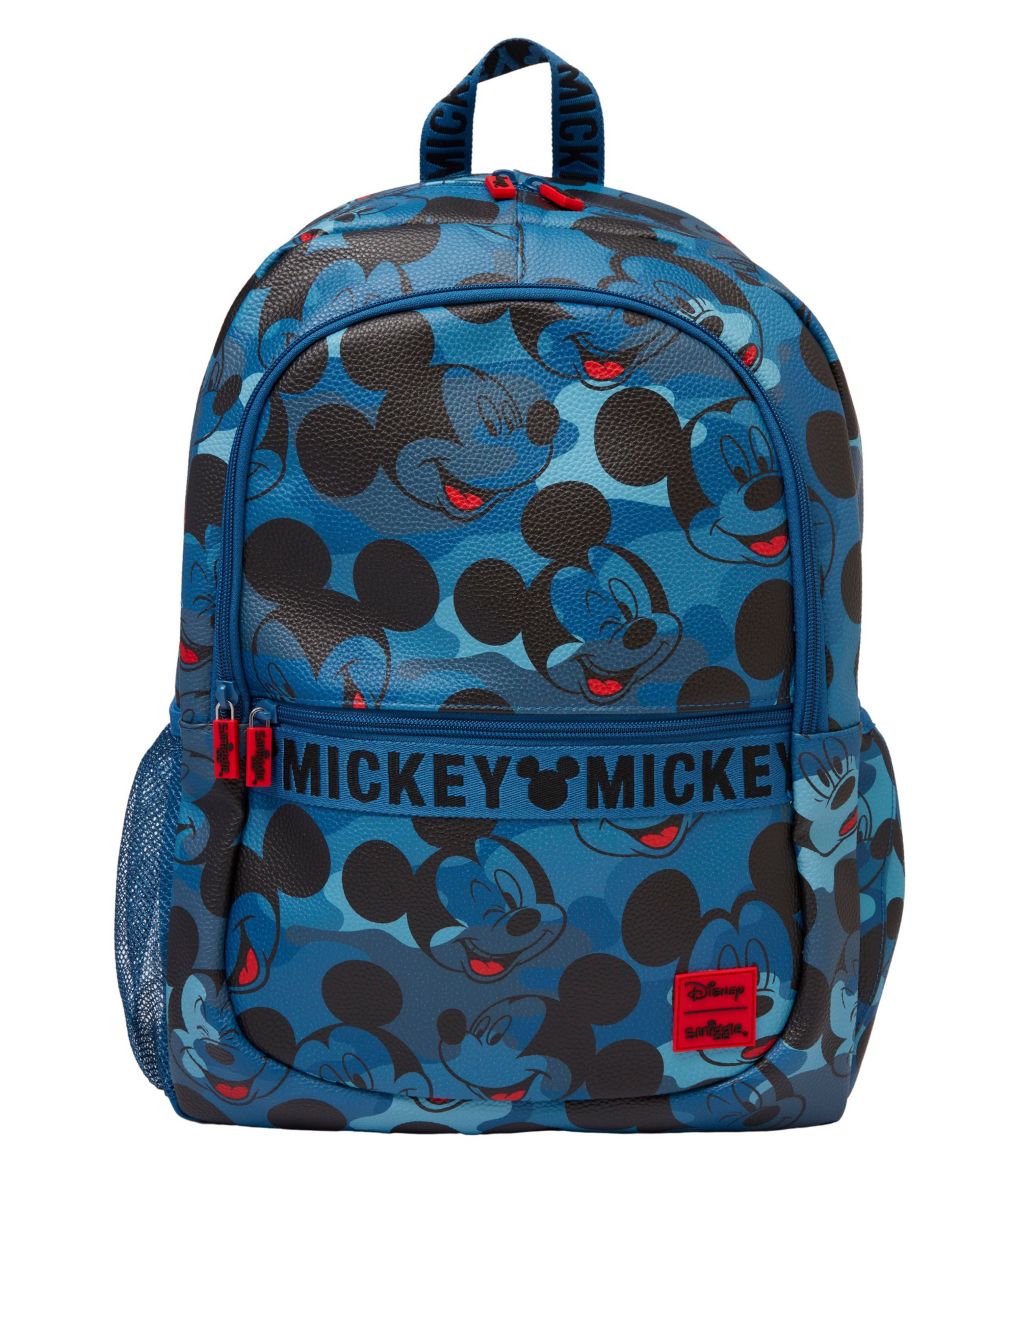 Kids' Mickey Mouse™ Backpack image 1